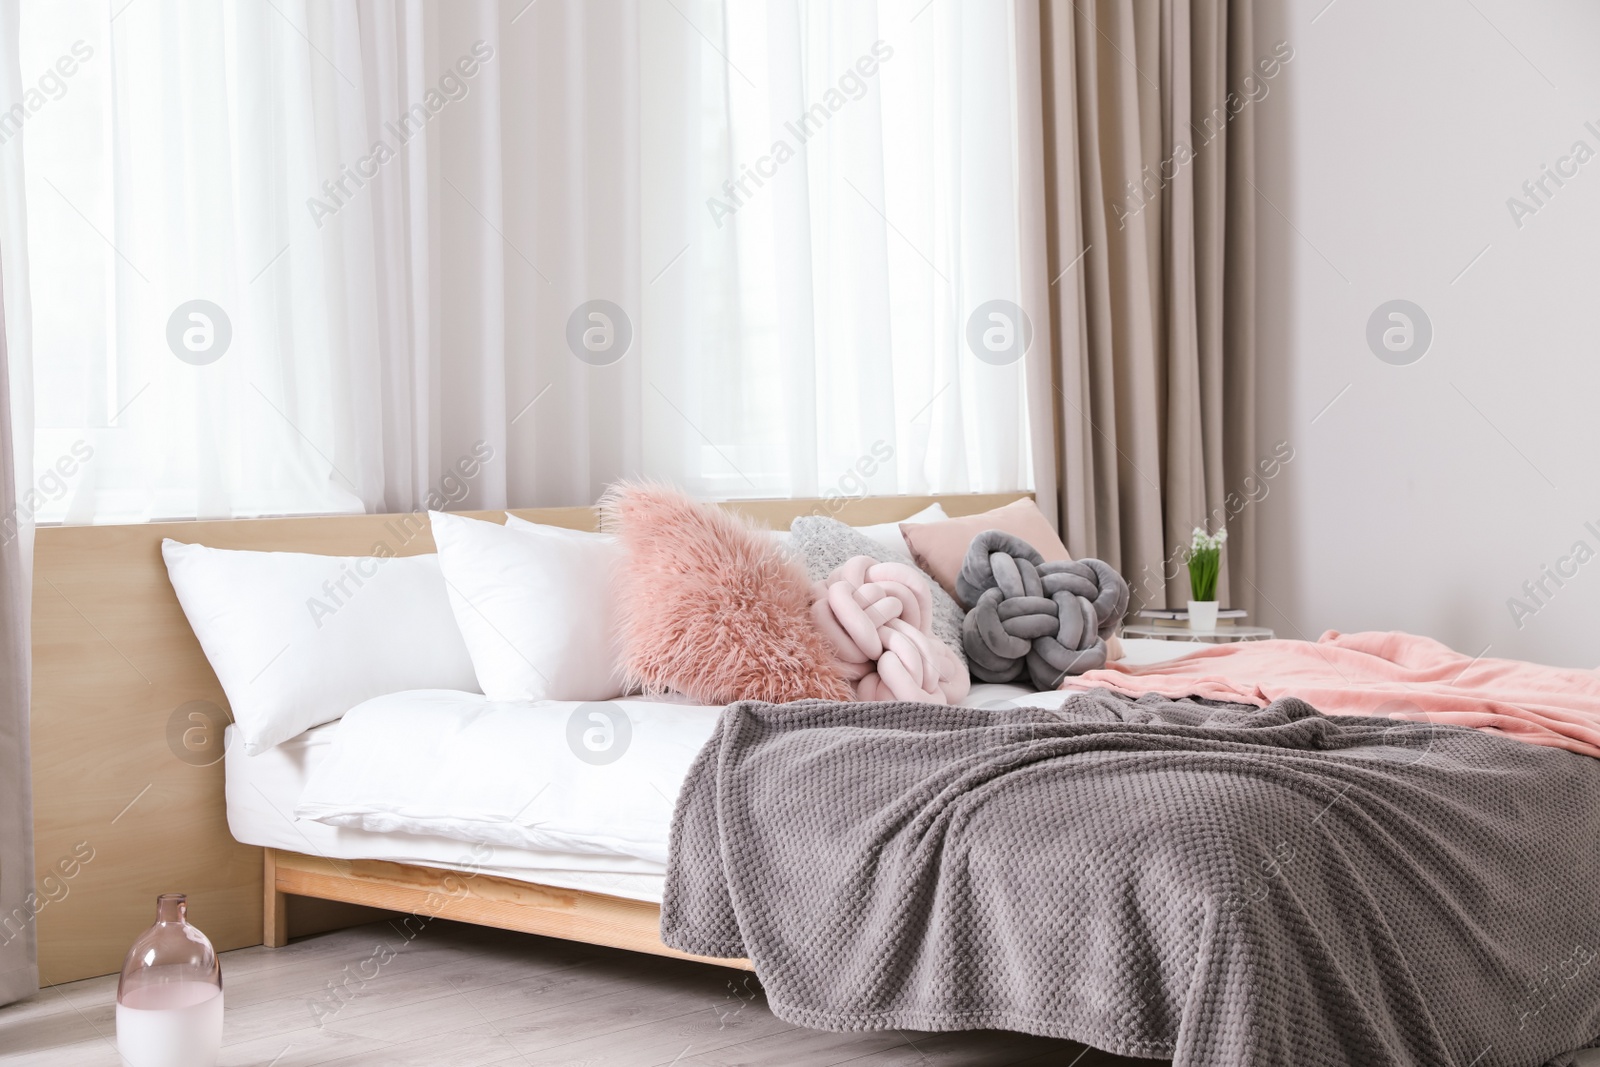 Photo of Comfortable bed with pillows and plaid in modern room interior